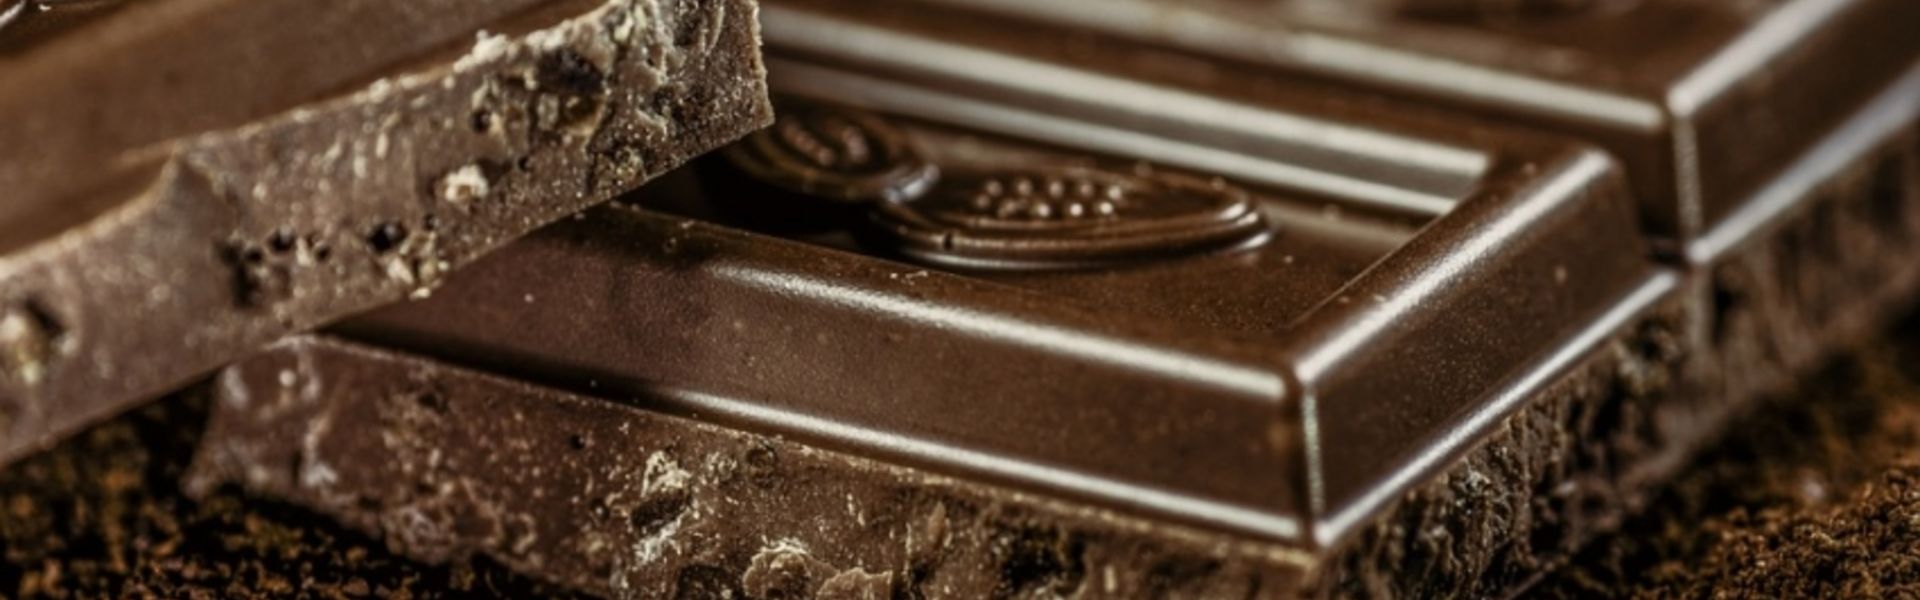 How chocolate can boost your brain power